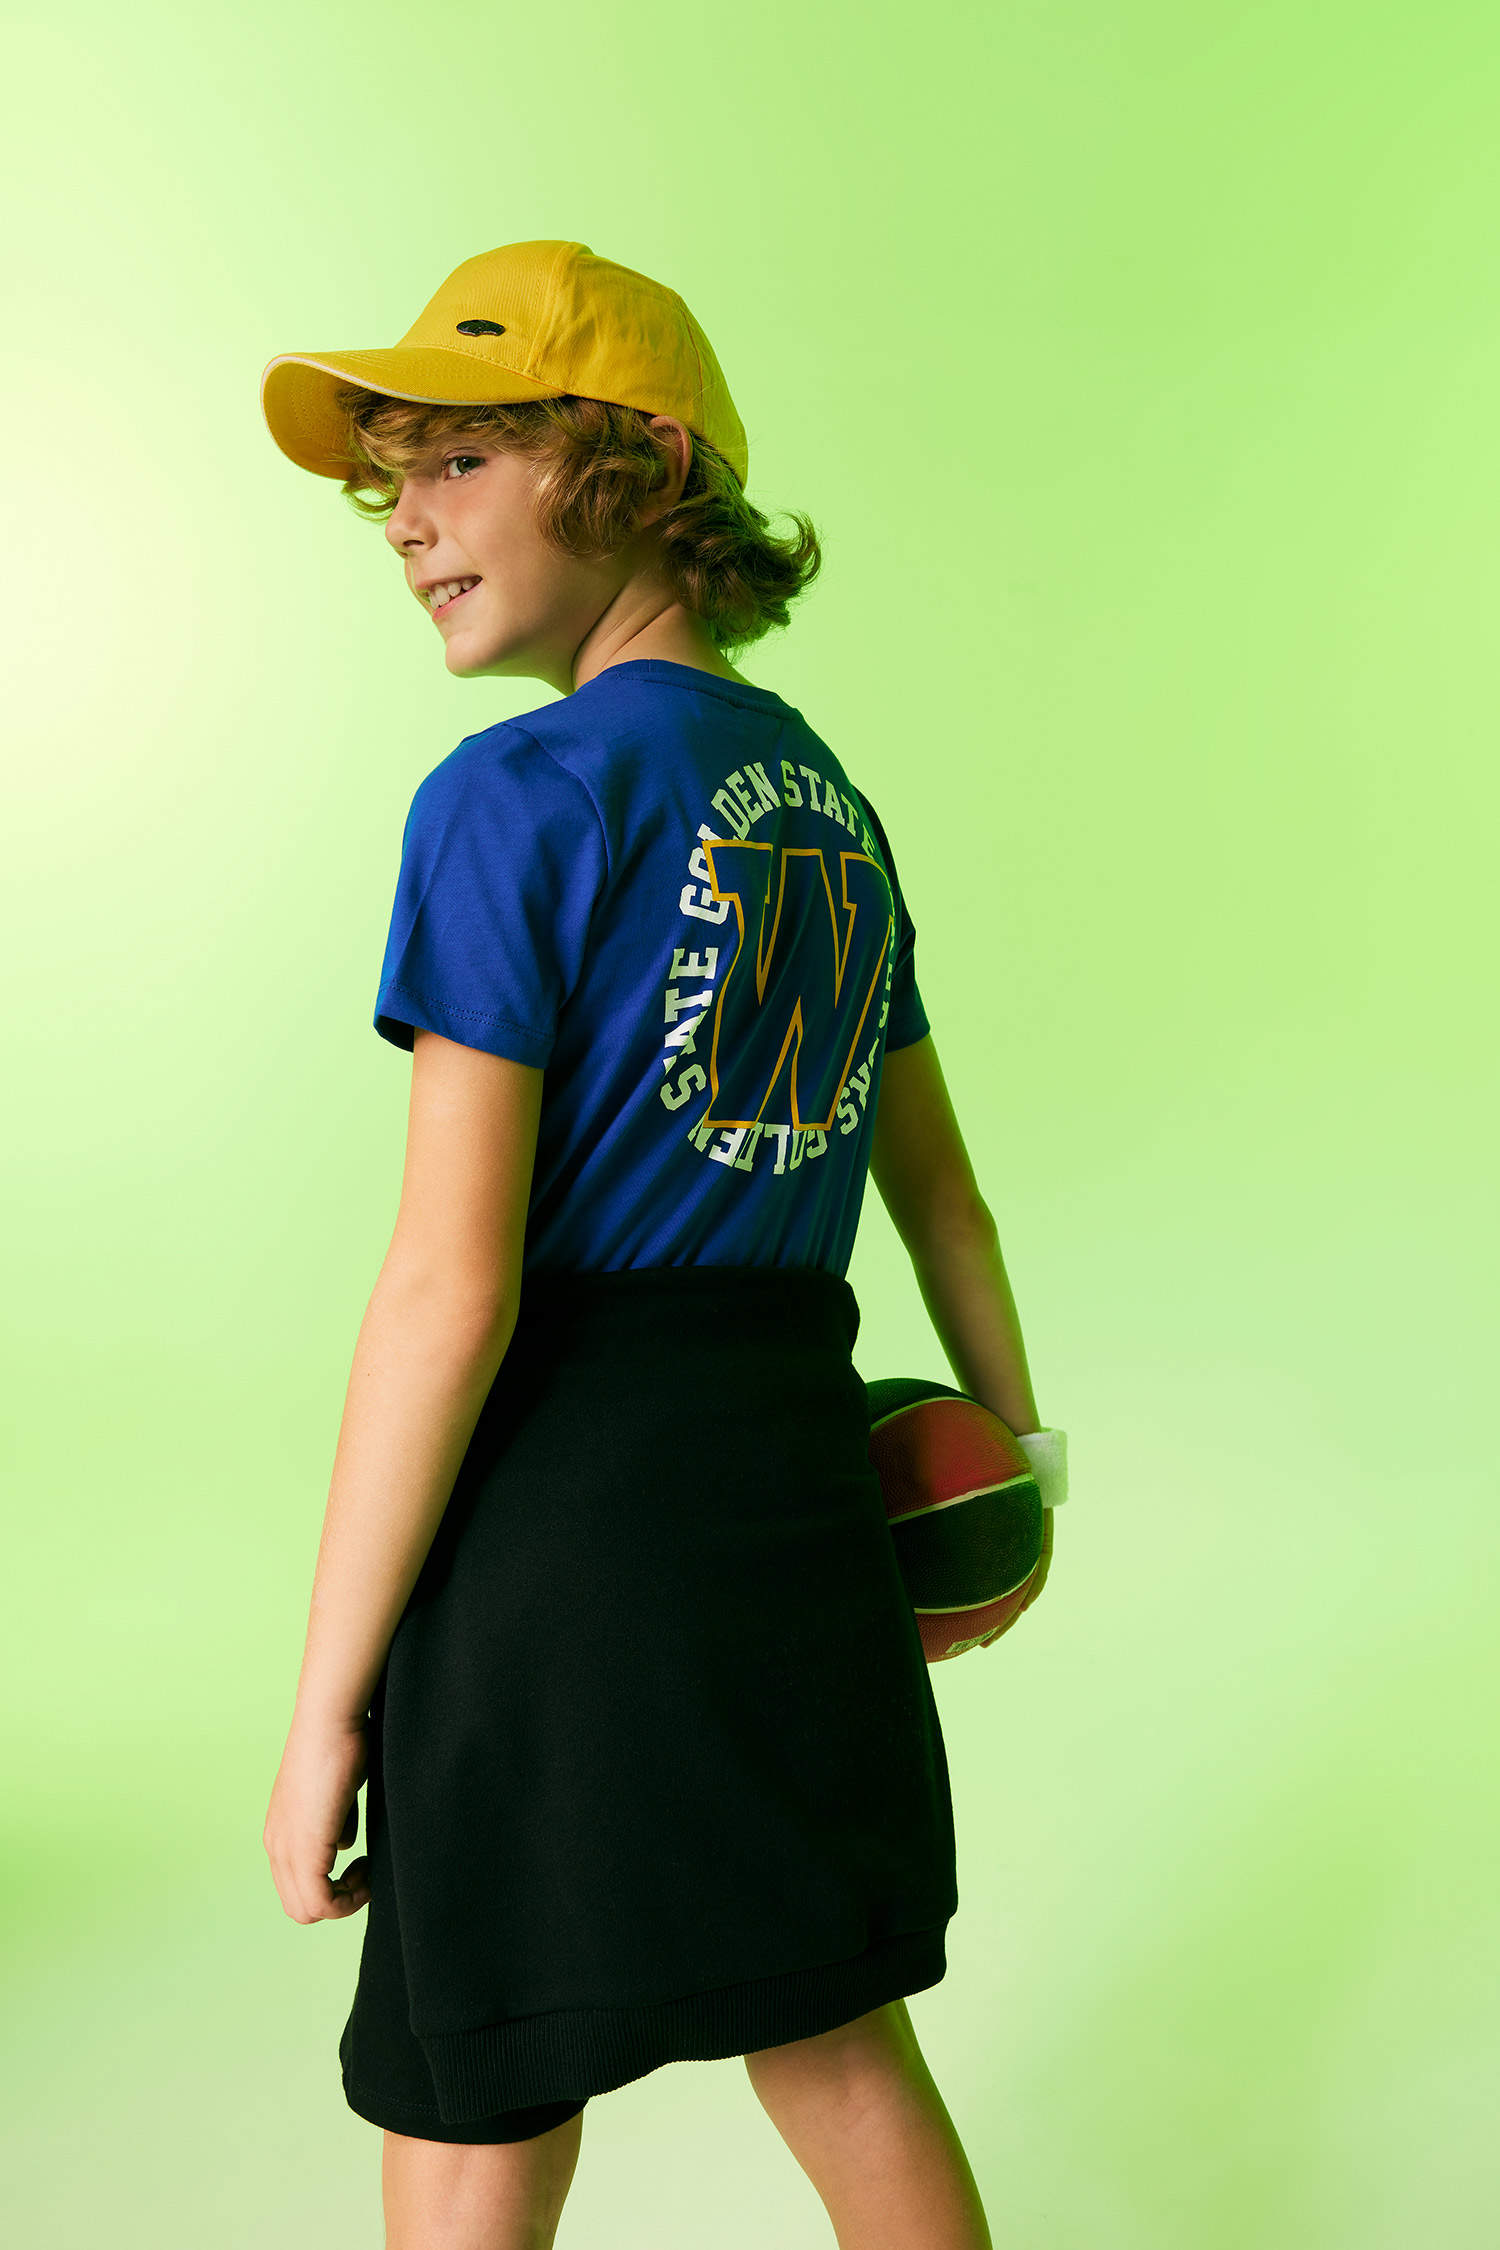 The Best Golden State Warriors Gear, Jerseys, and Shirts to Wear